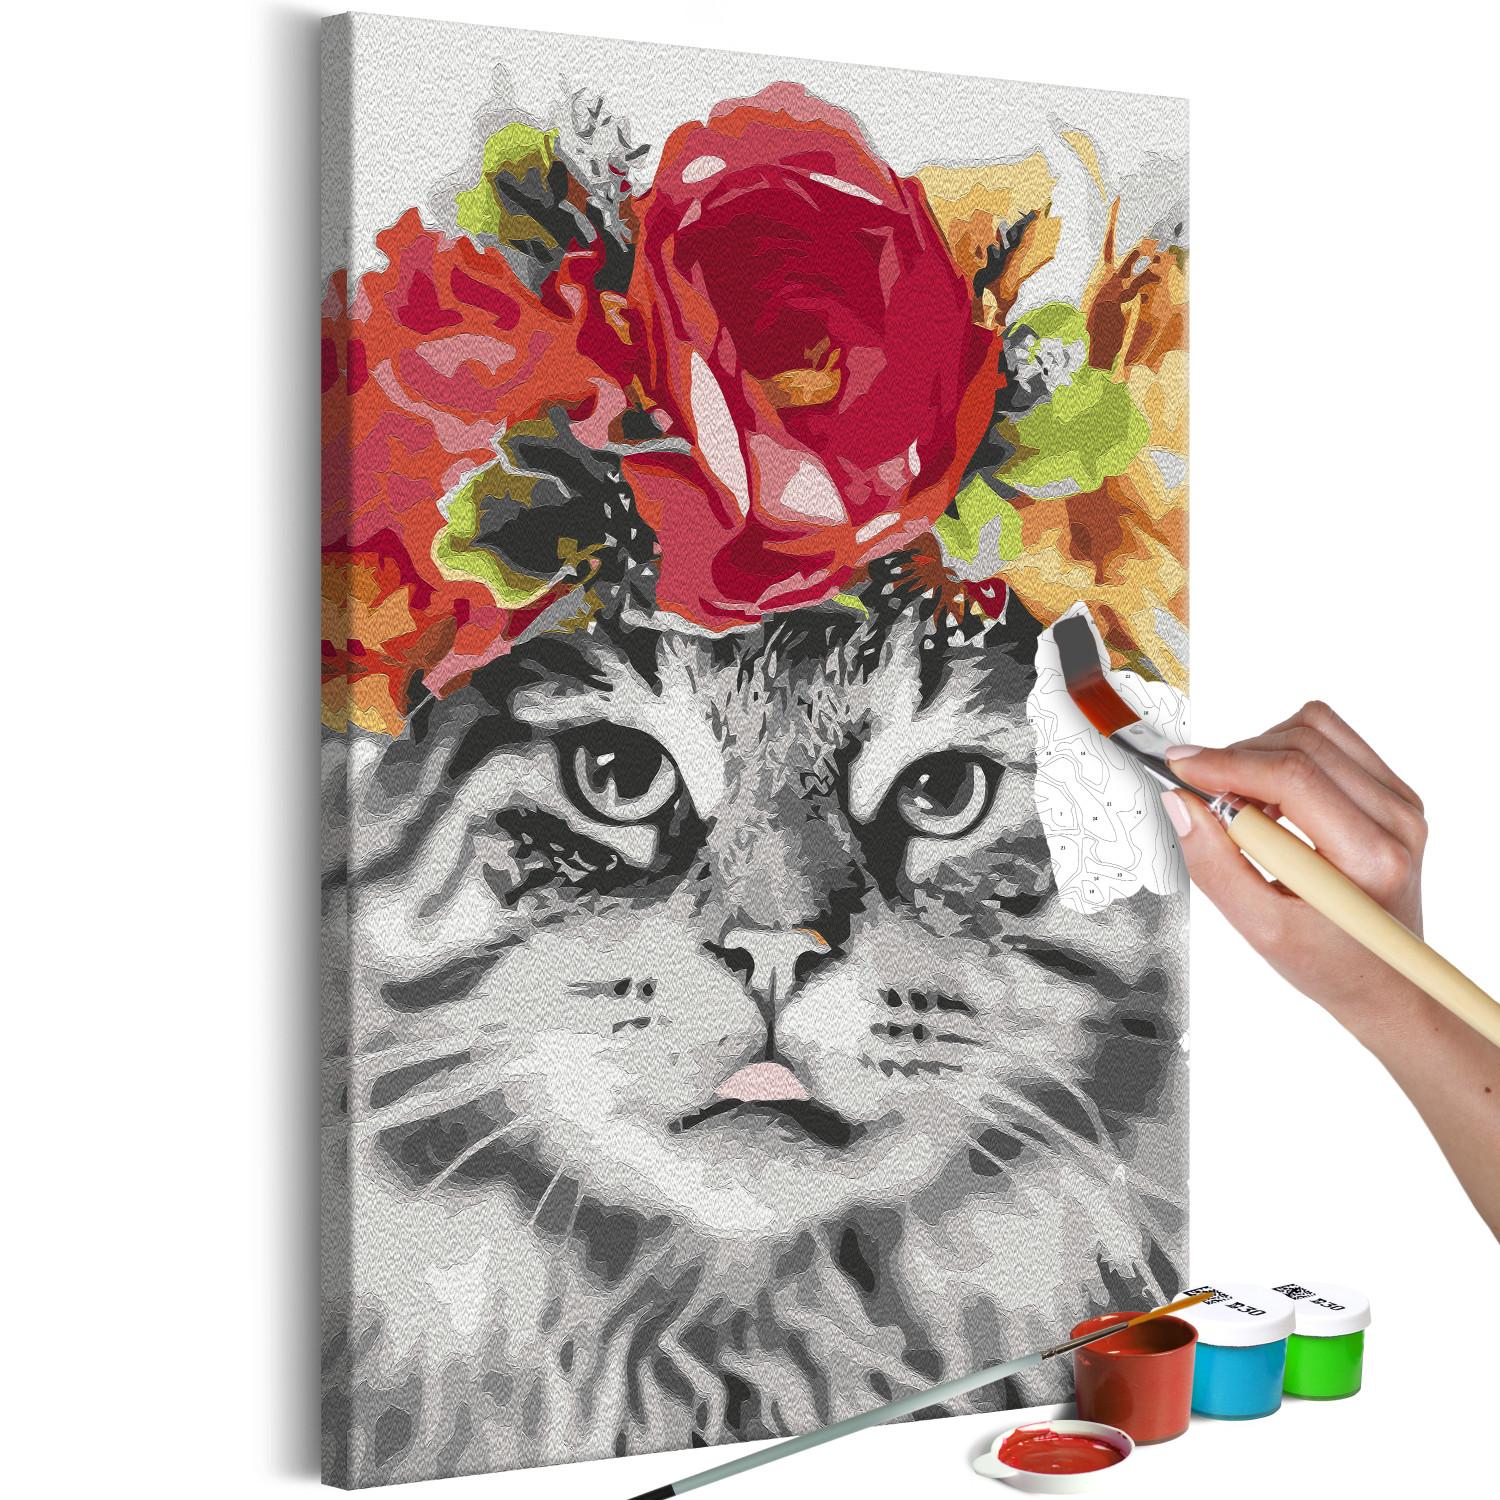 Paint by Number Kit Cat With Flowers